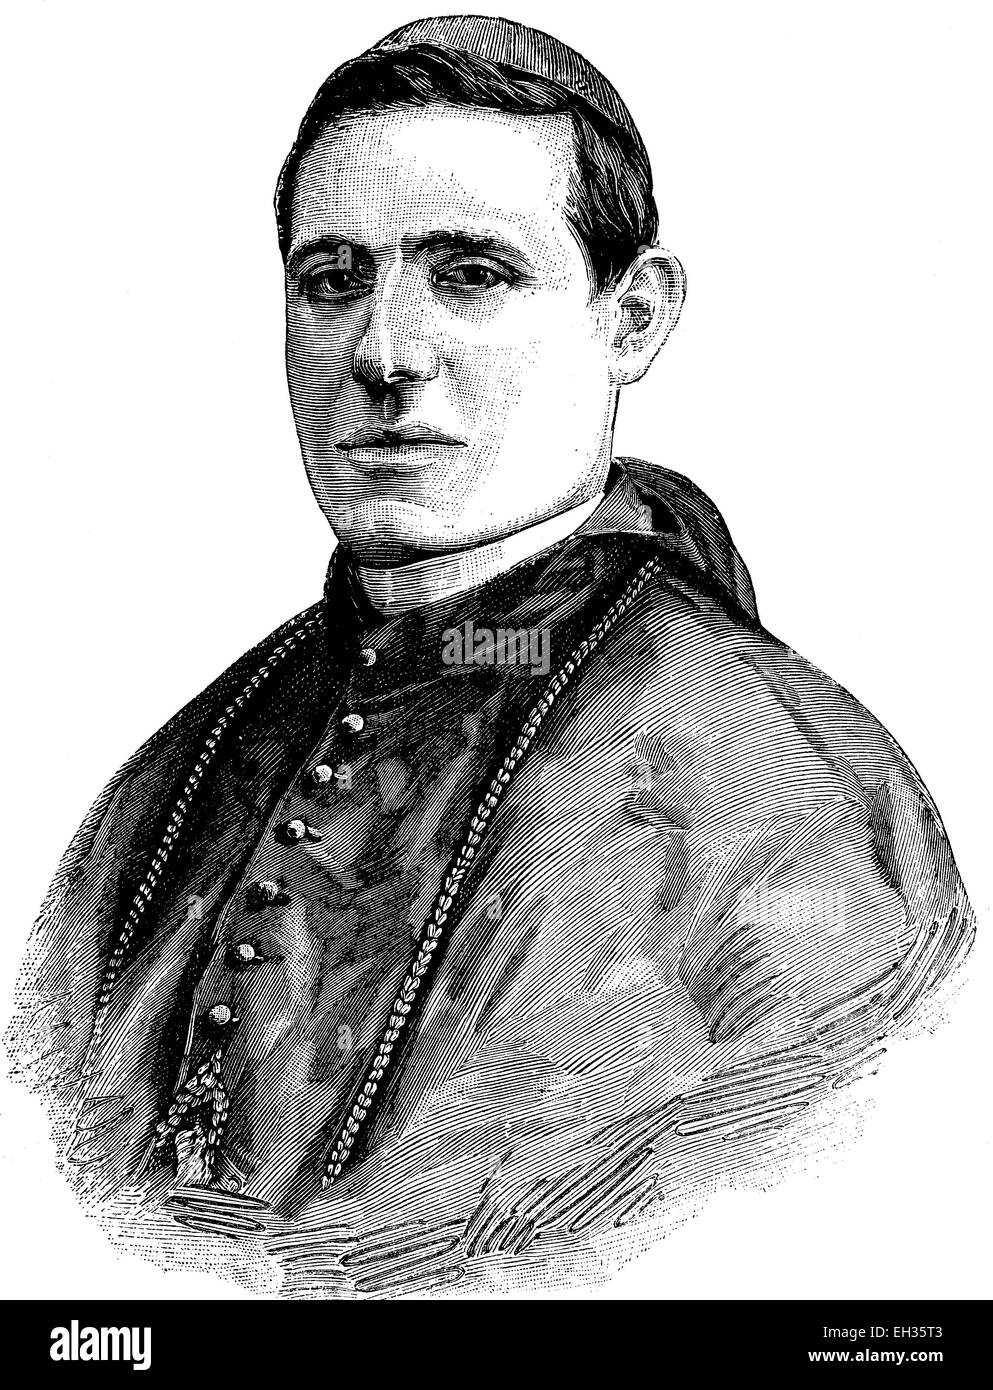 Mariano Cardinal Rampolla del Tindaro, 1843-1913, Cardinal Secretary of State during the pontificate of Leo XIII, one of the leaders of the Catholic Church in the second half of the 19th century, woodcut, historical engraving, 1880 Stock Photo